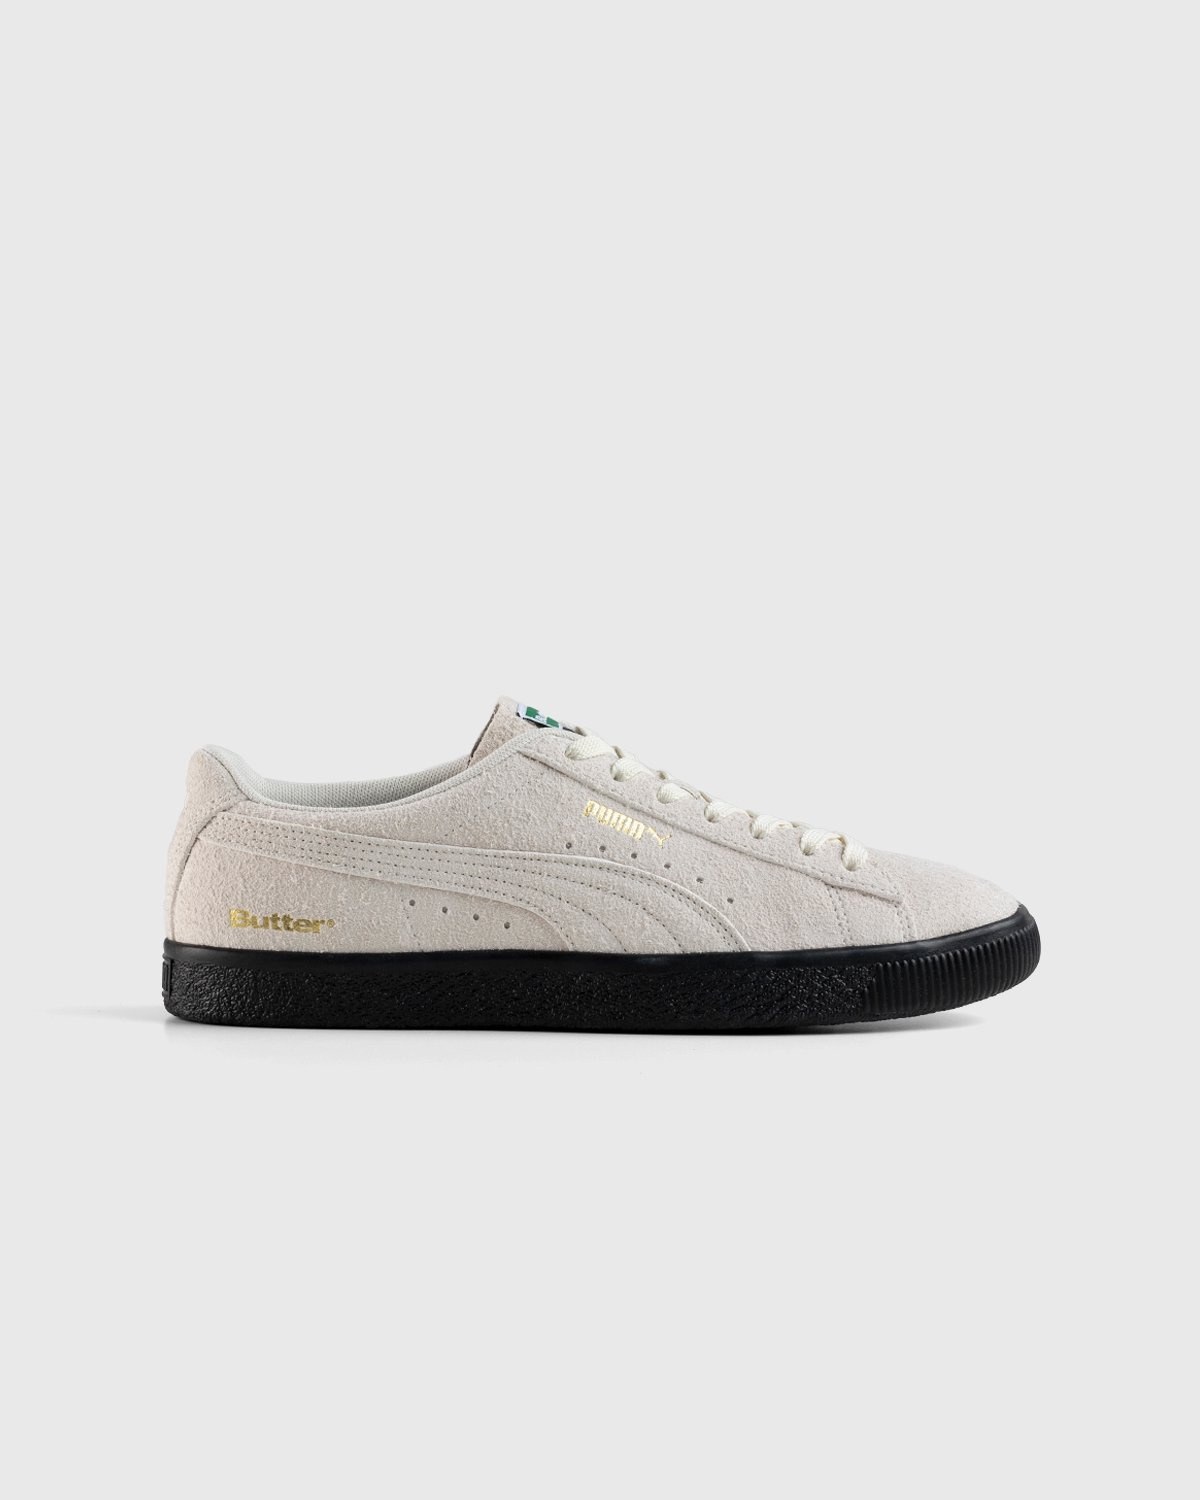 Puma x Butter Goods – Suede VTG Whisper White/Puma Black - Low Top Sneakers - Green - Image 1